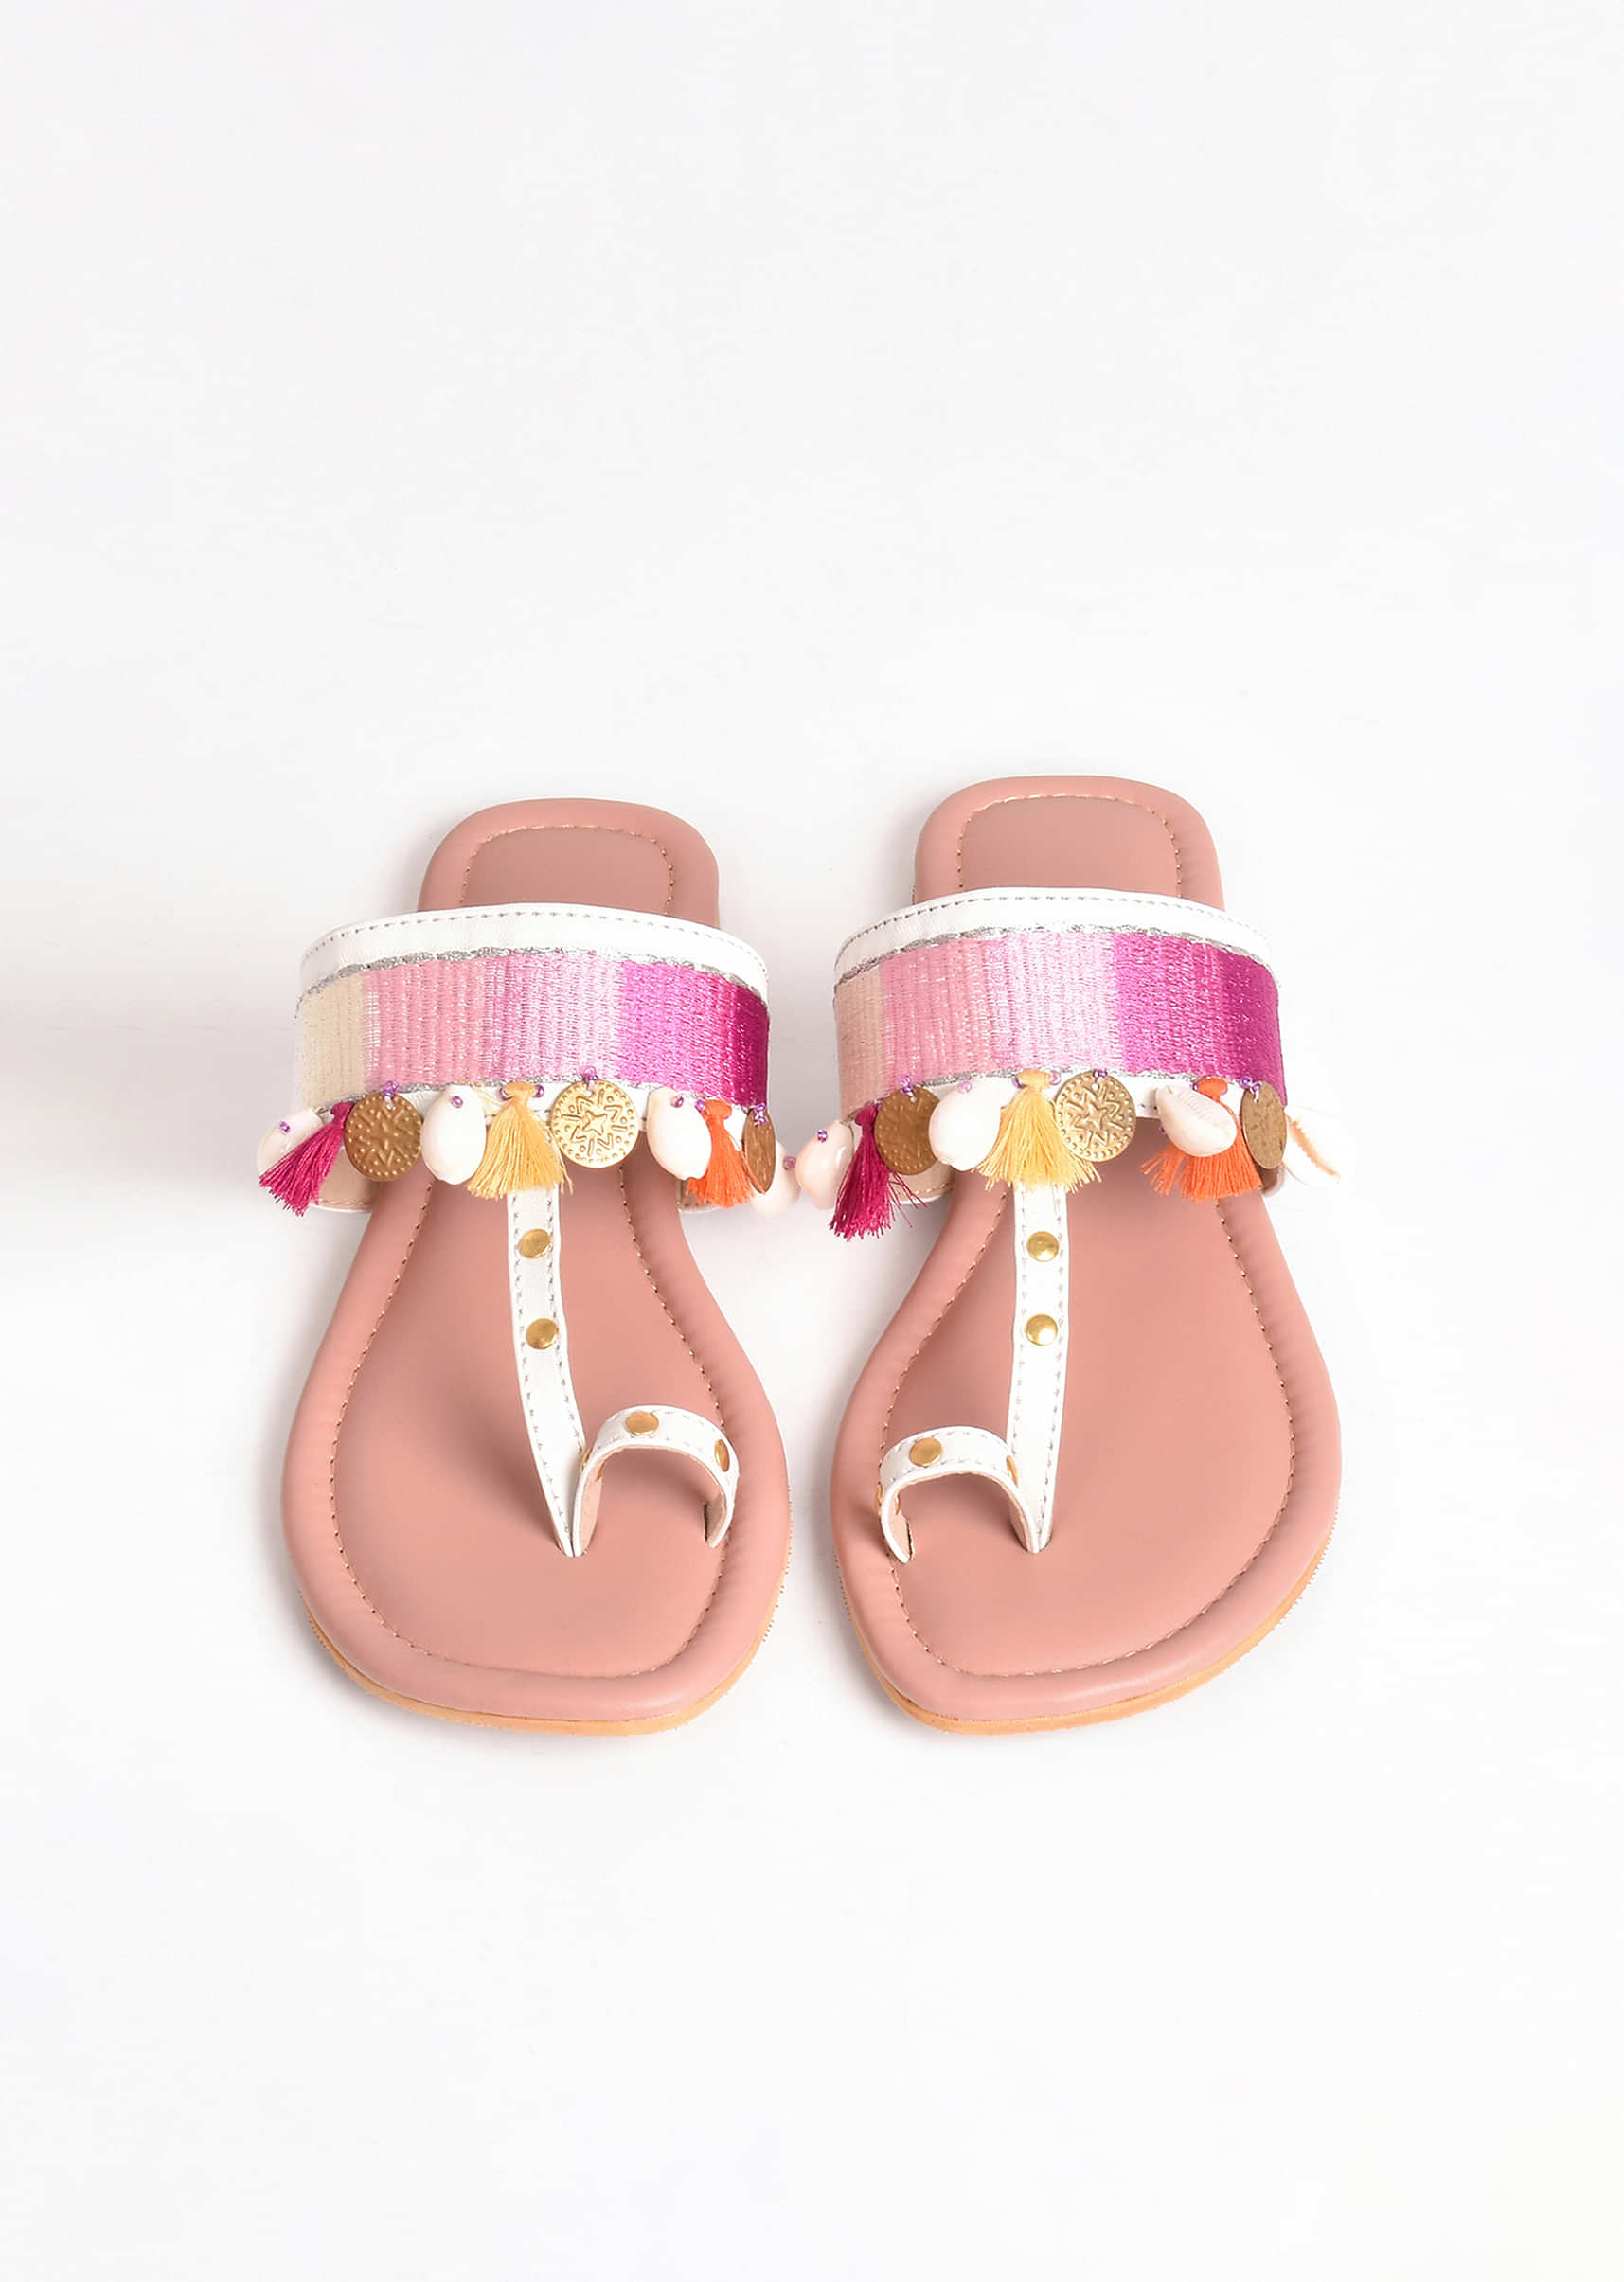 Pink Ombre Kolhapuri Flats With Conchas, Tassels And Coins By Sole House